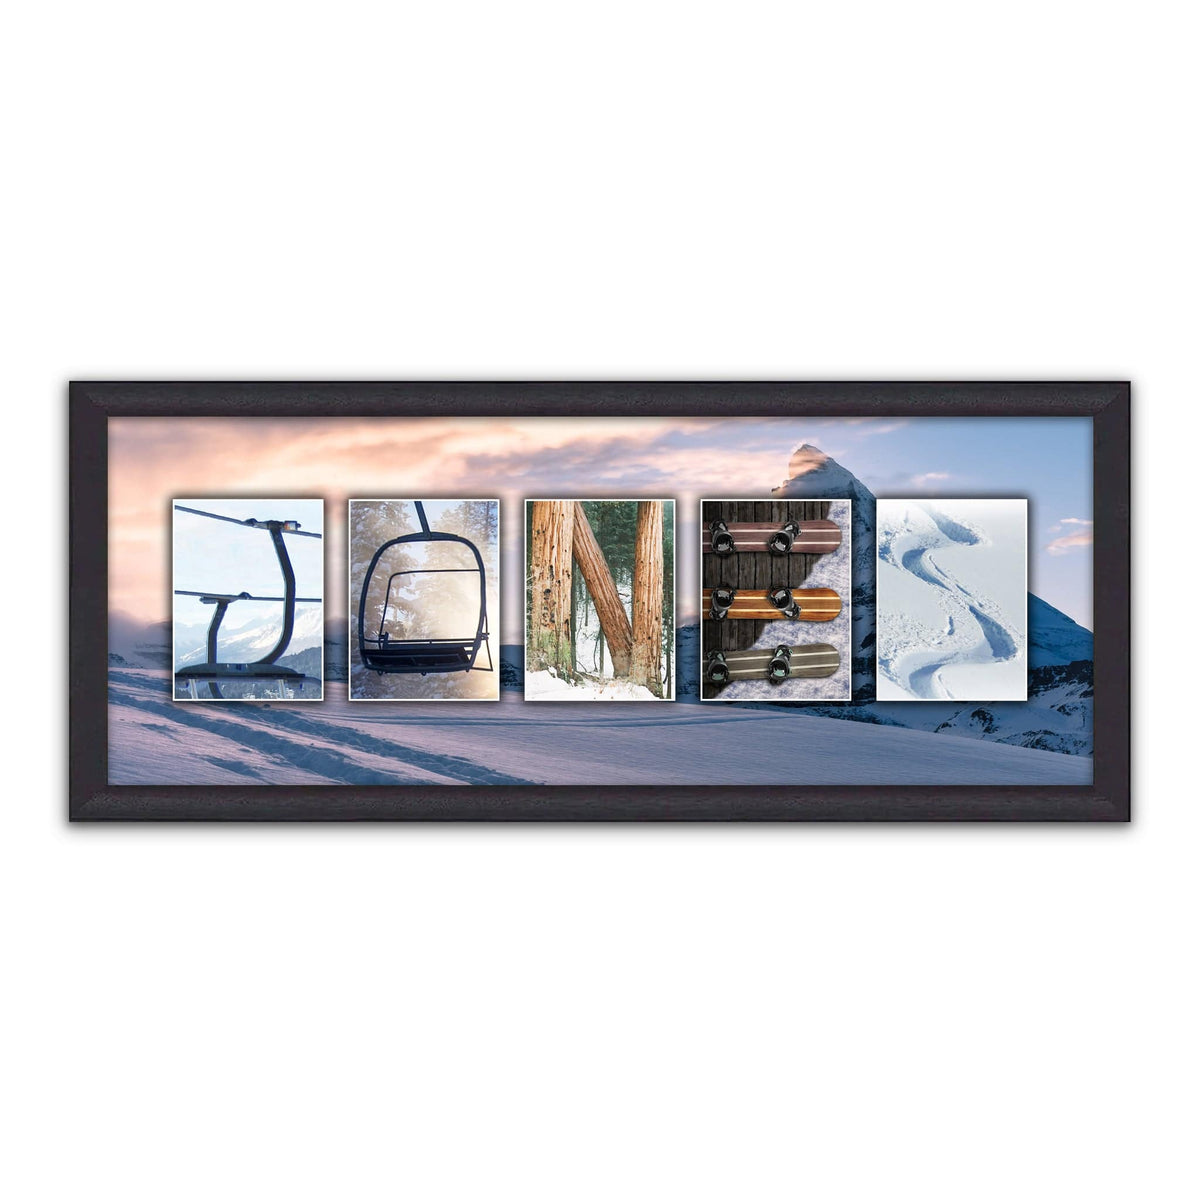 Personal-Prints Snowboard Name Art Framed Canvas - Personalized gift for snowboarder